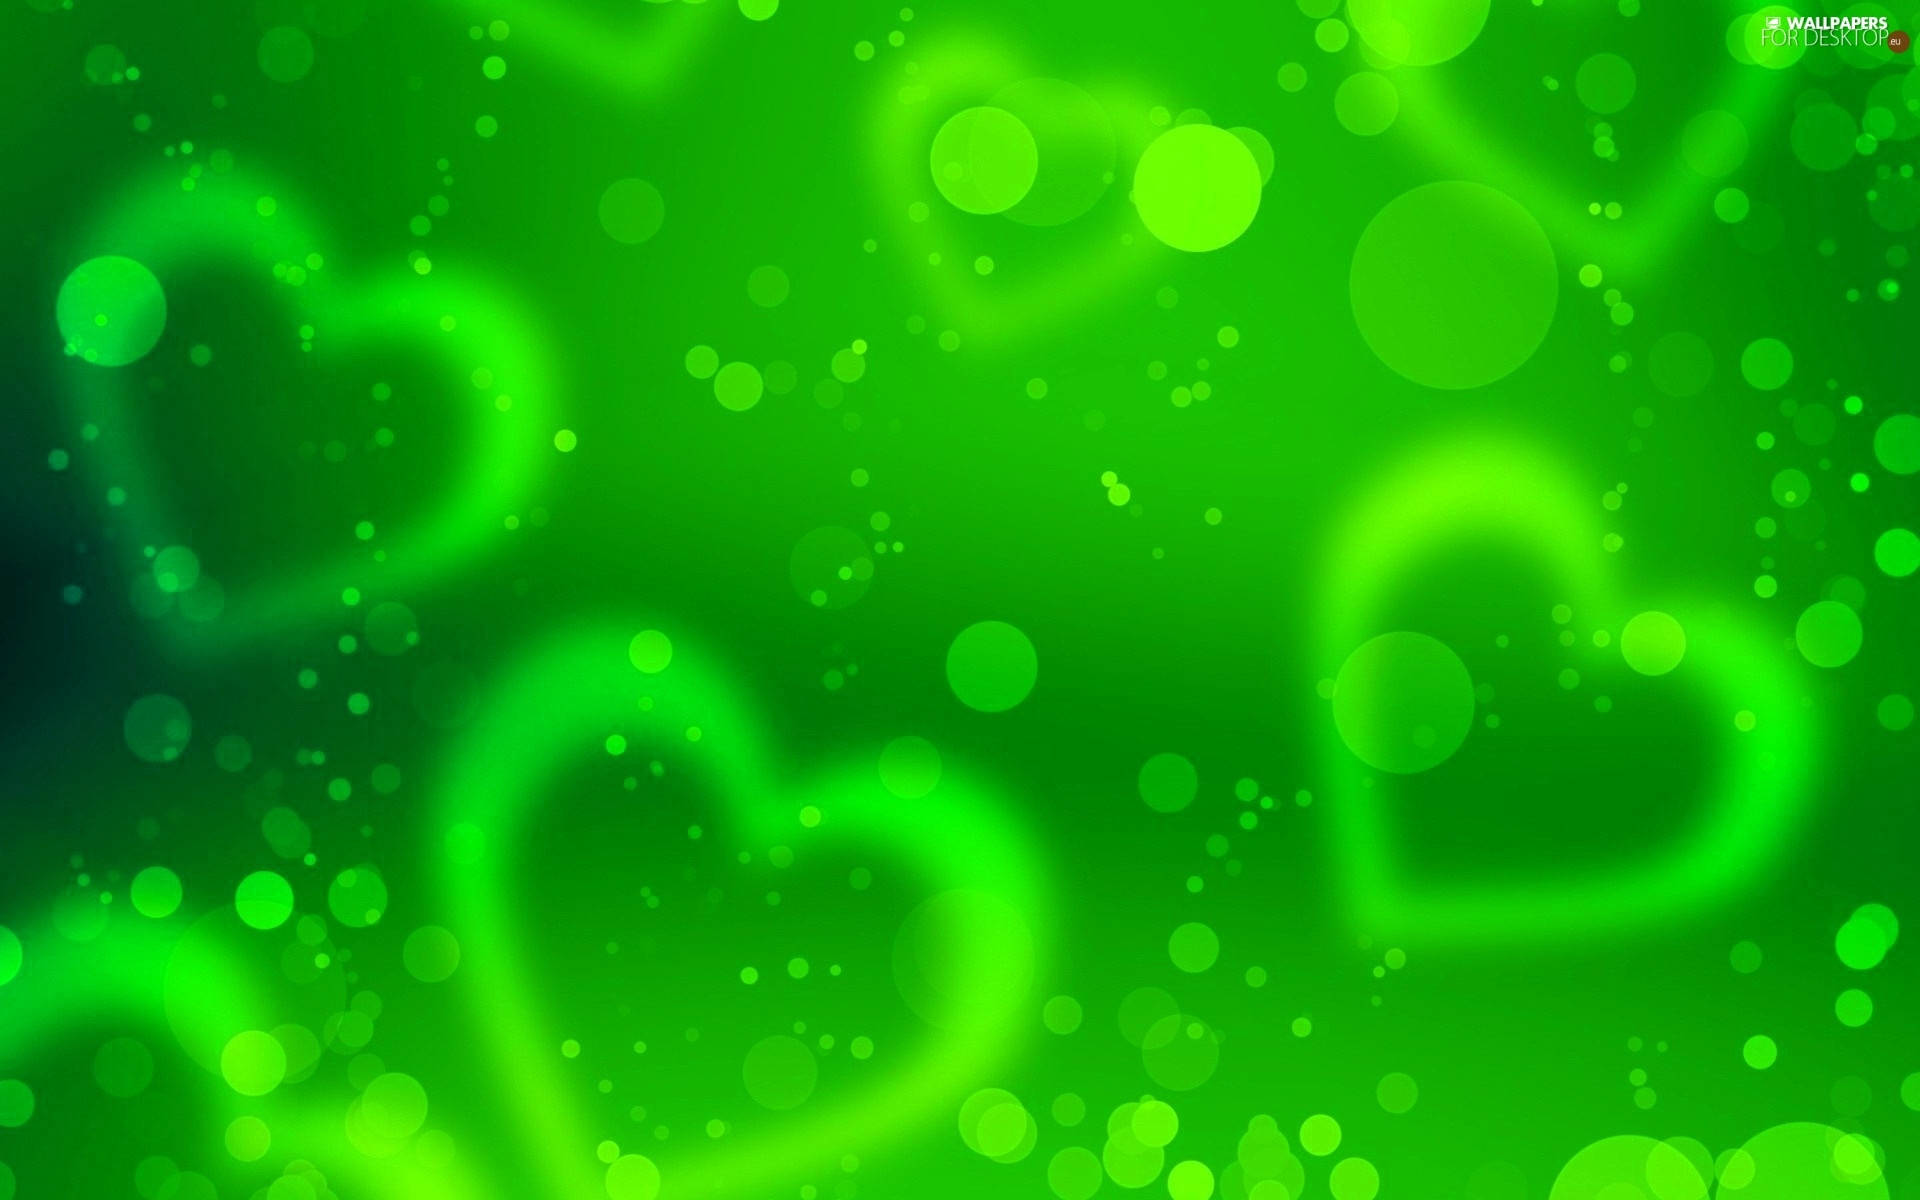 green hearts backgrounds